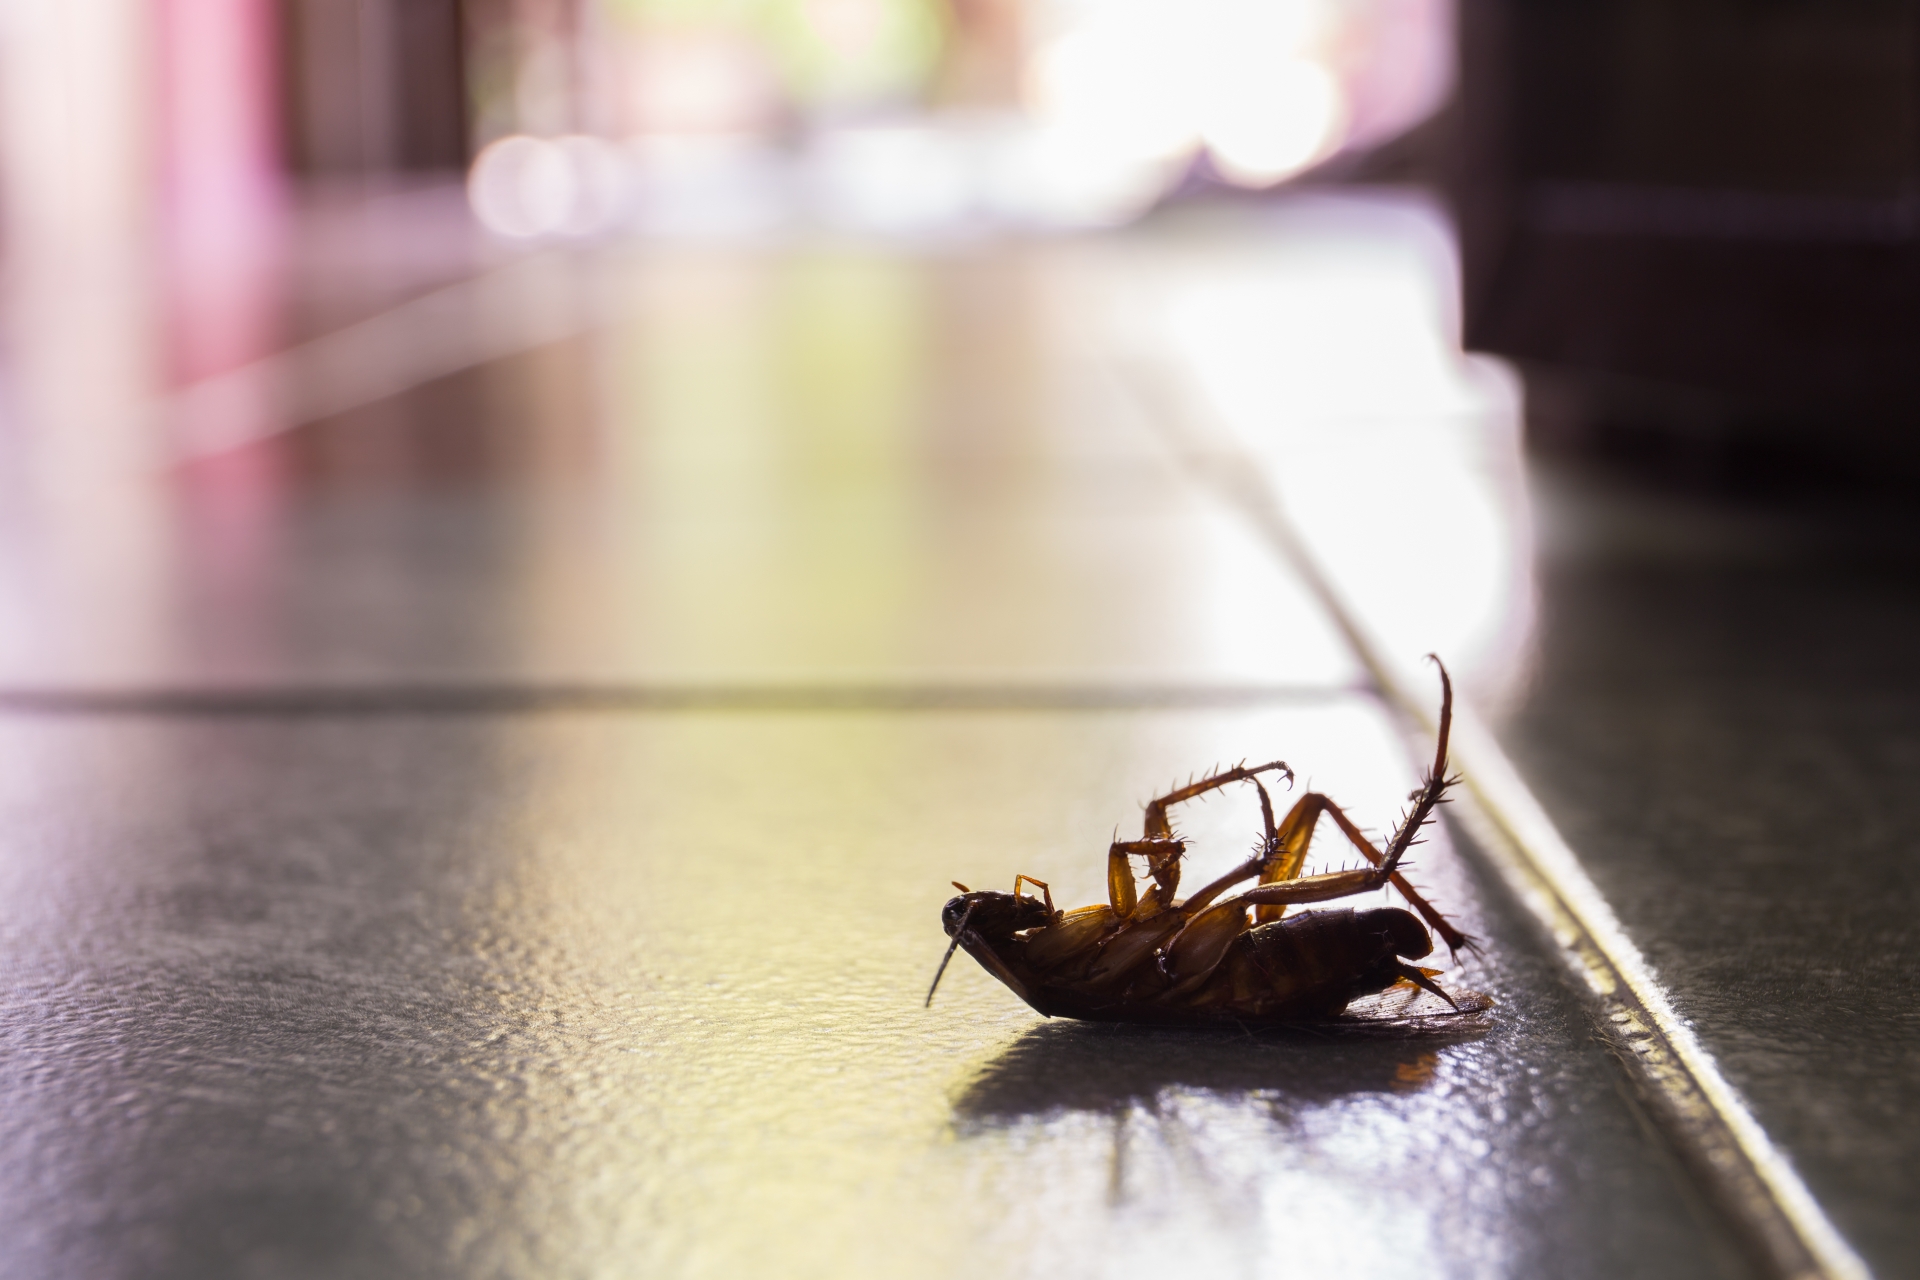 Cockroach Control, Pest Control in Bloomsbury, Gray's Inn, WC1. Call Now 020 8166 9746